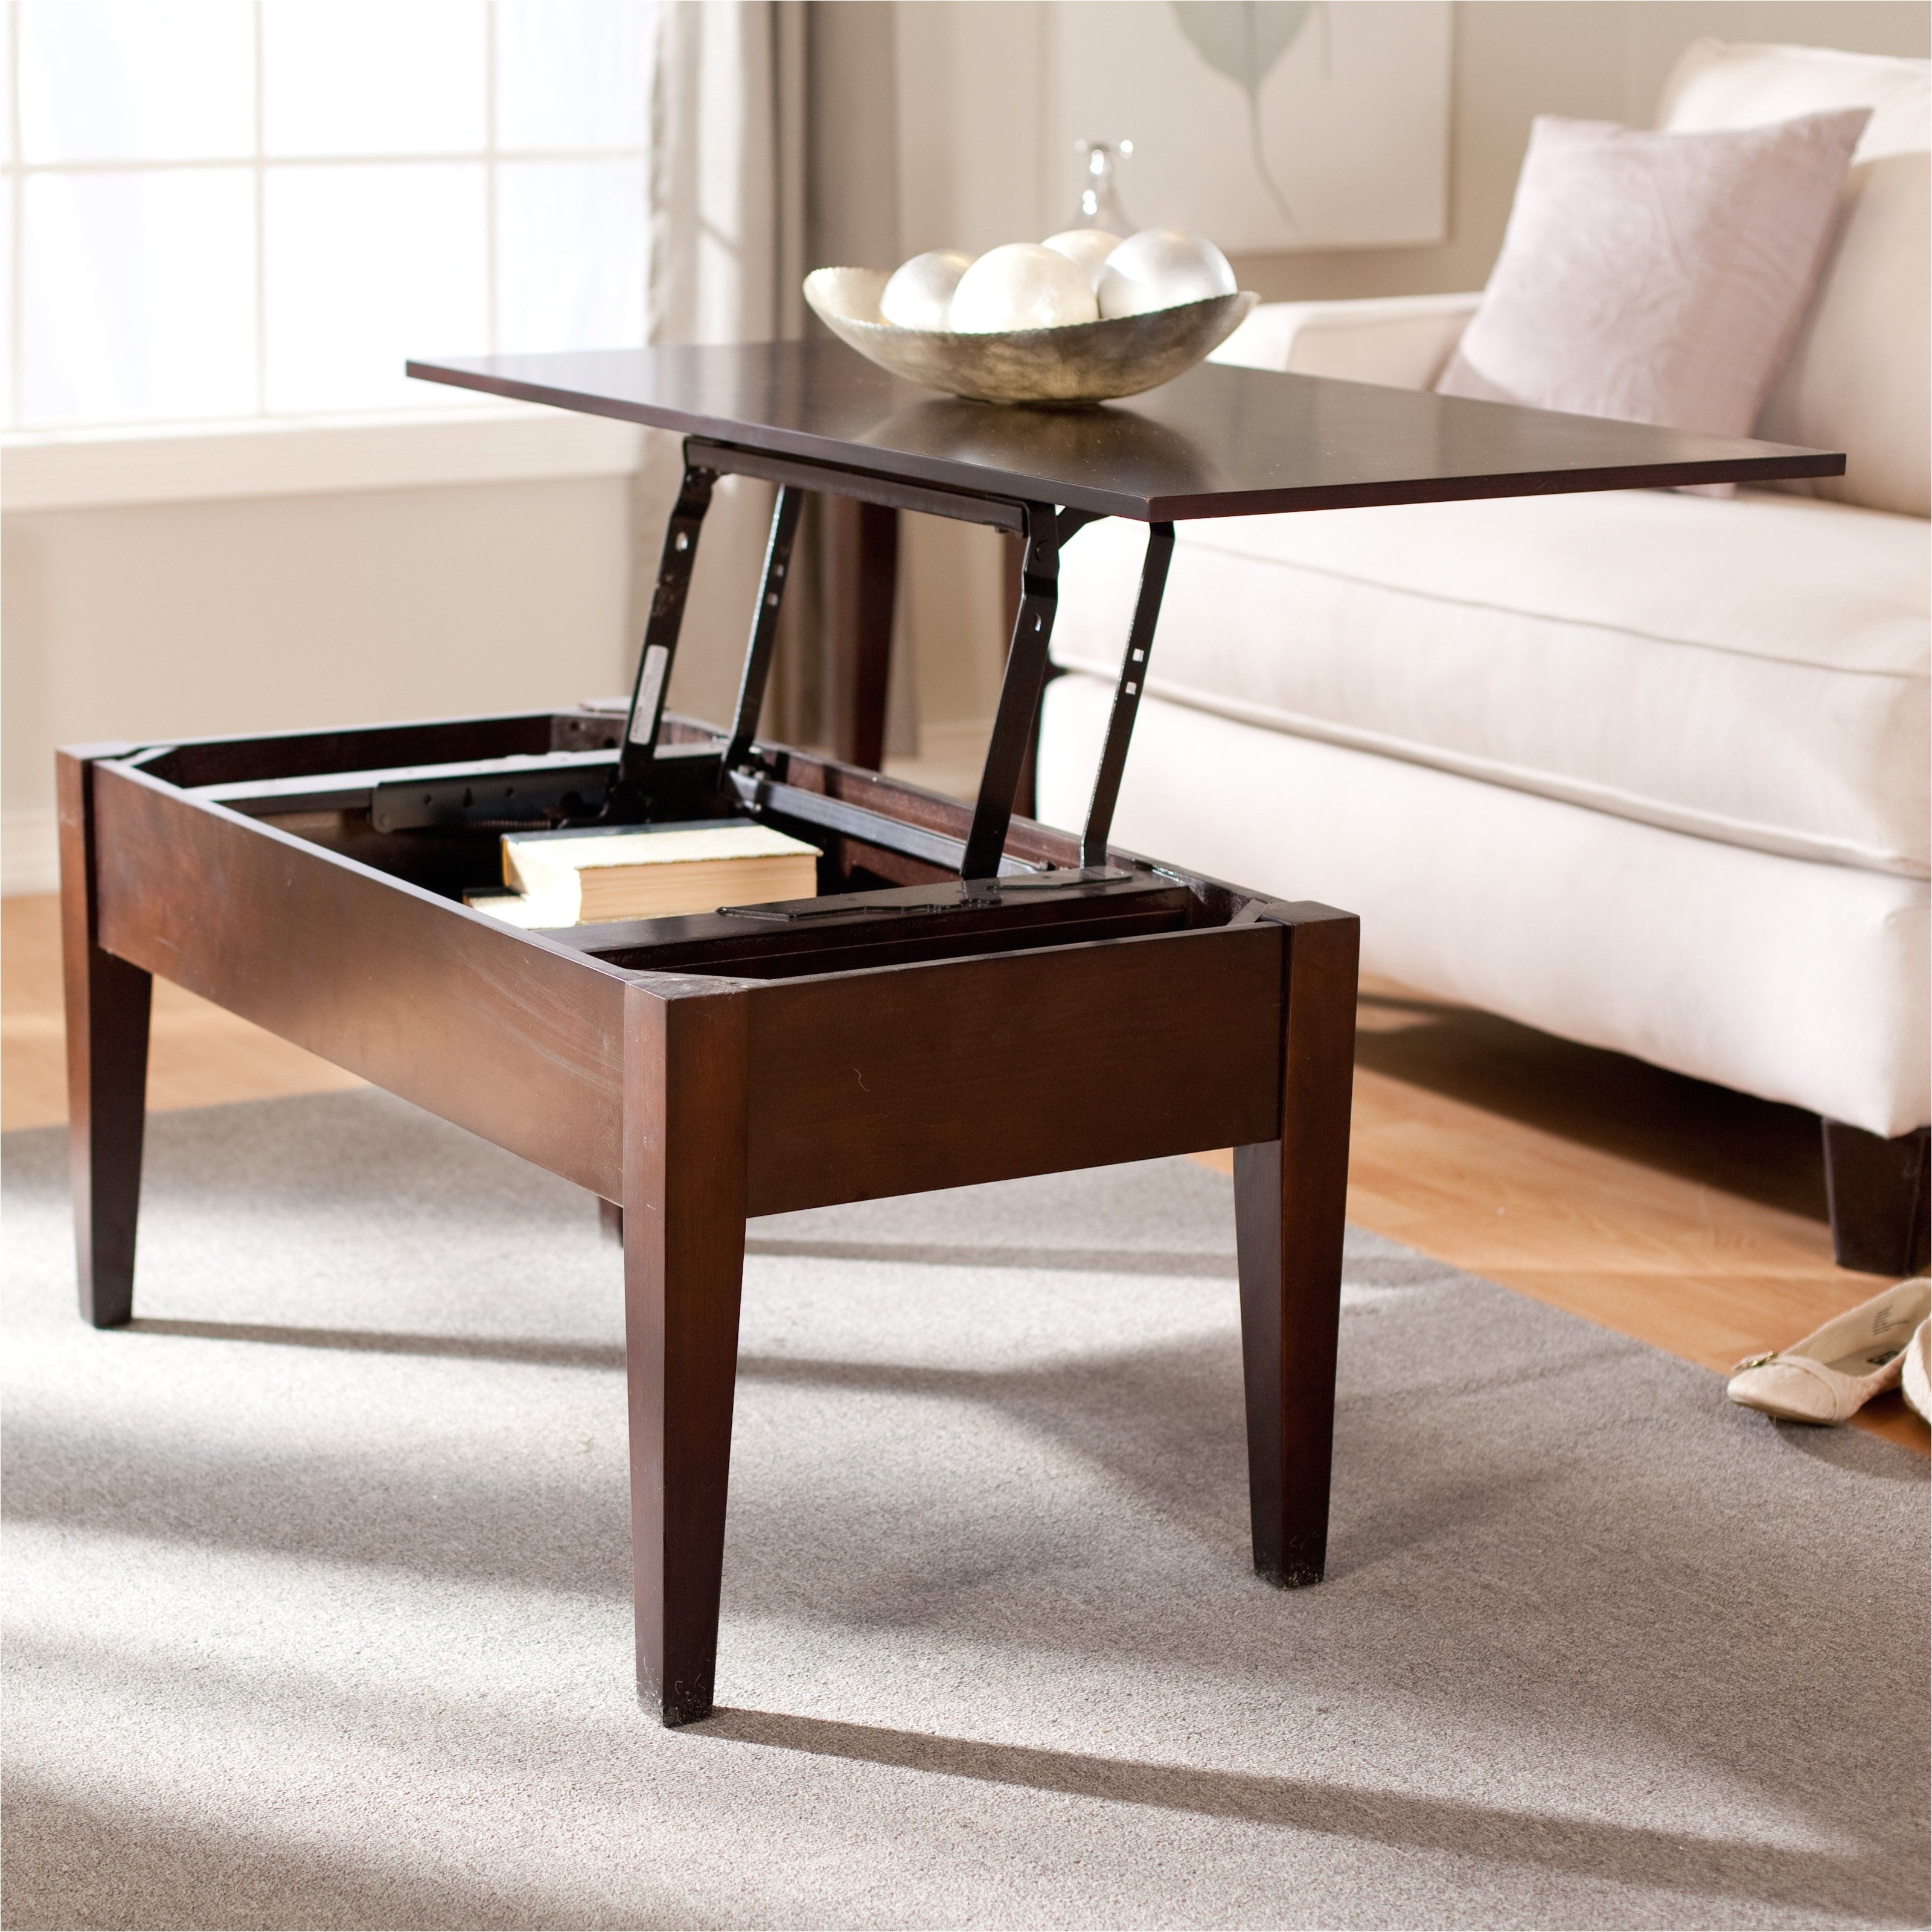 Small Coffee Table with Drawers Awesome End Tables with Drawers for Living Room New Coffee Tables